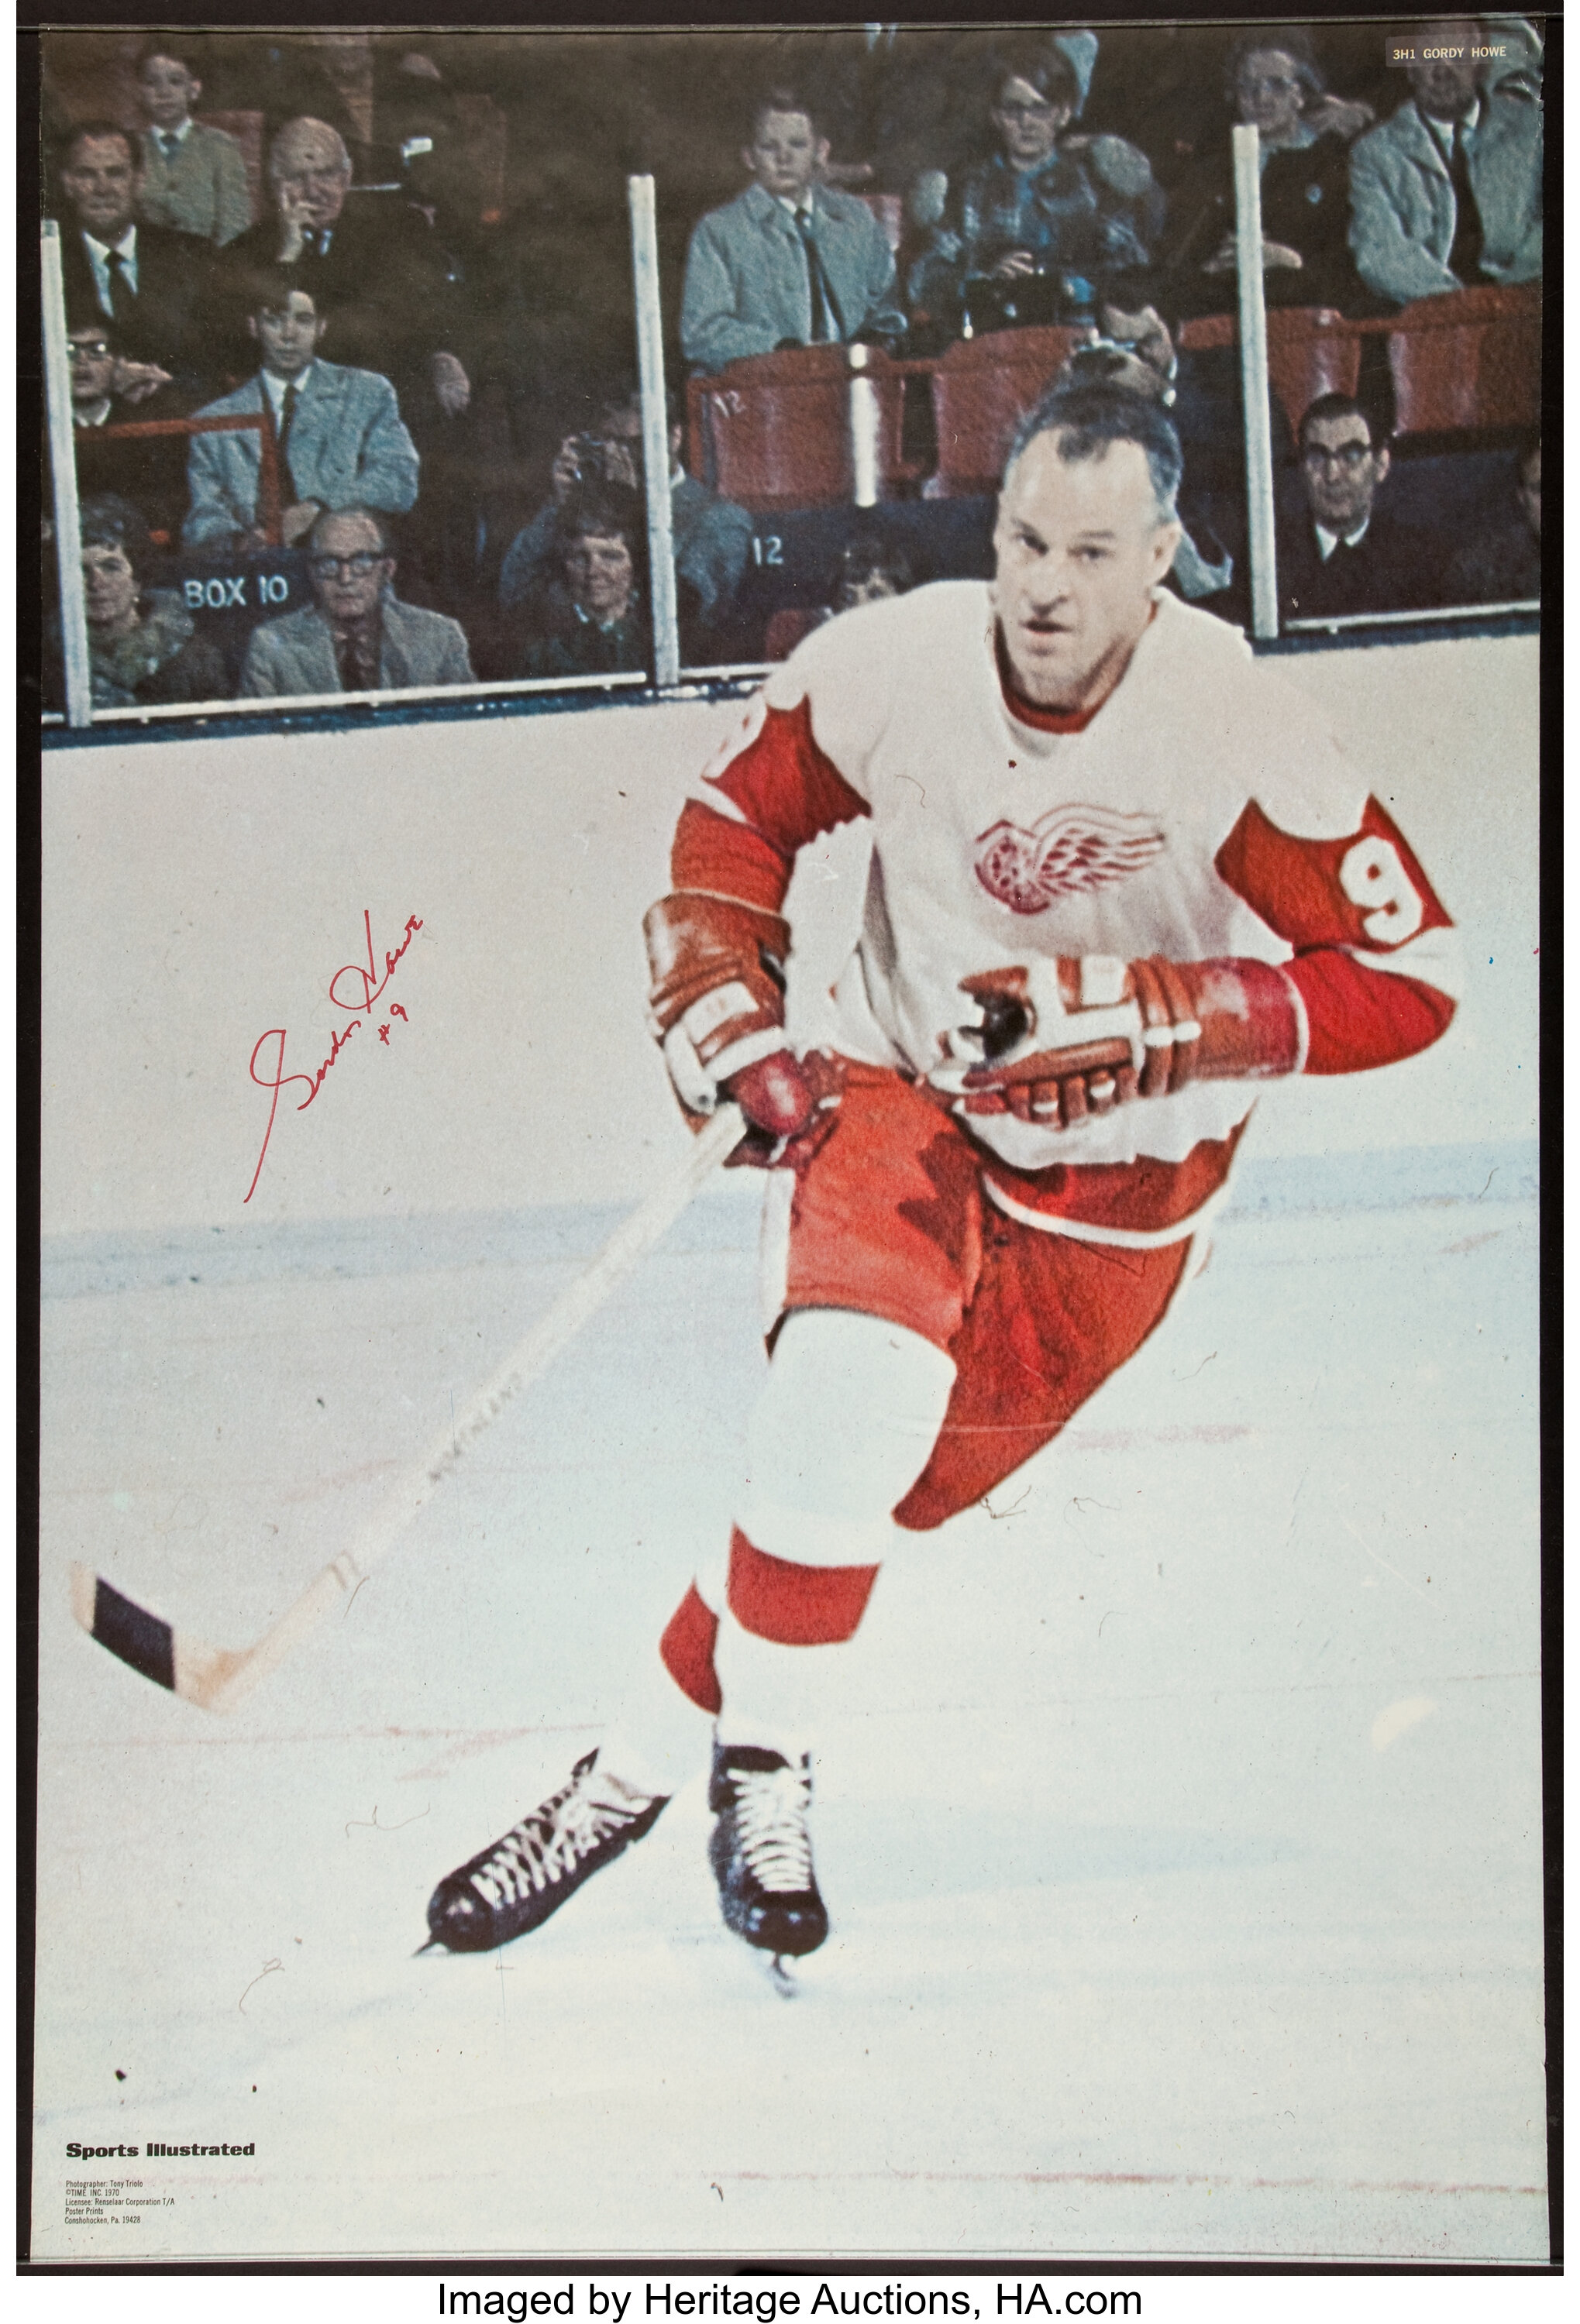 Gordie Howe: Pictures of the hockey legend - Sports Illustrated